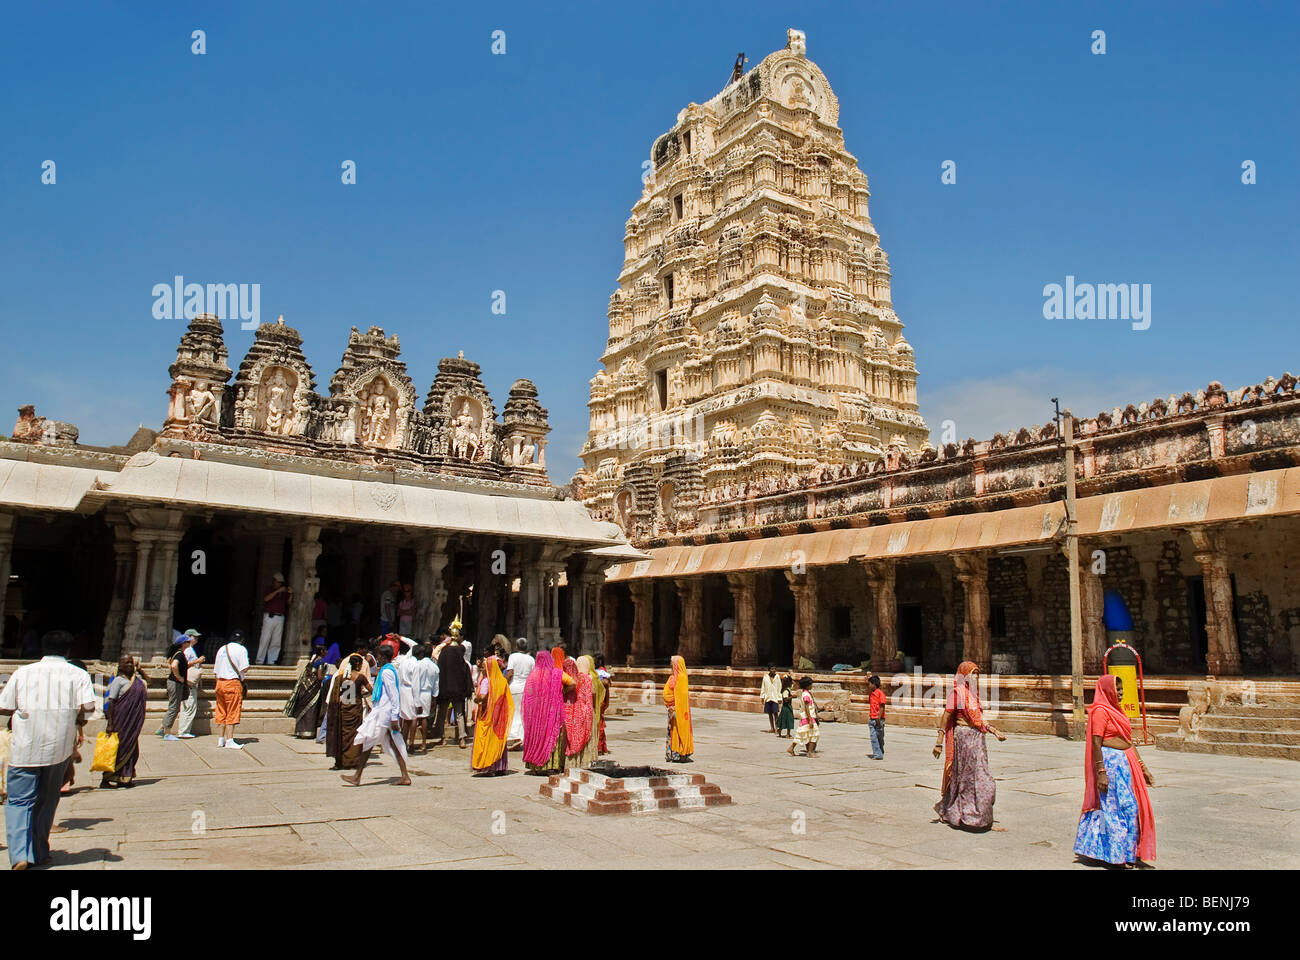 The Virupaksha Temple also called Pampapathi temple is located at the foot of Hemakuta Hill and was rebuilt in 1510 for the Stock Photo